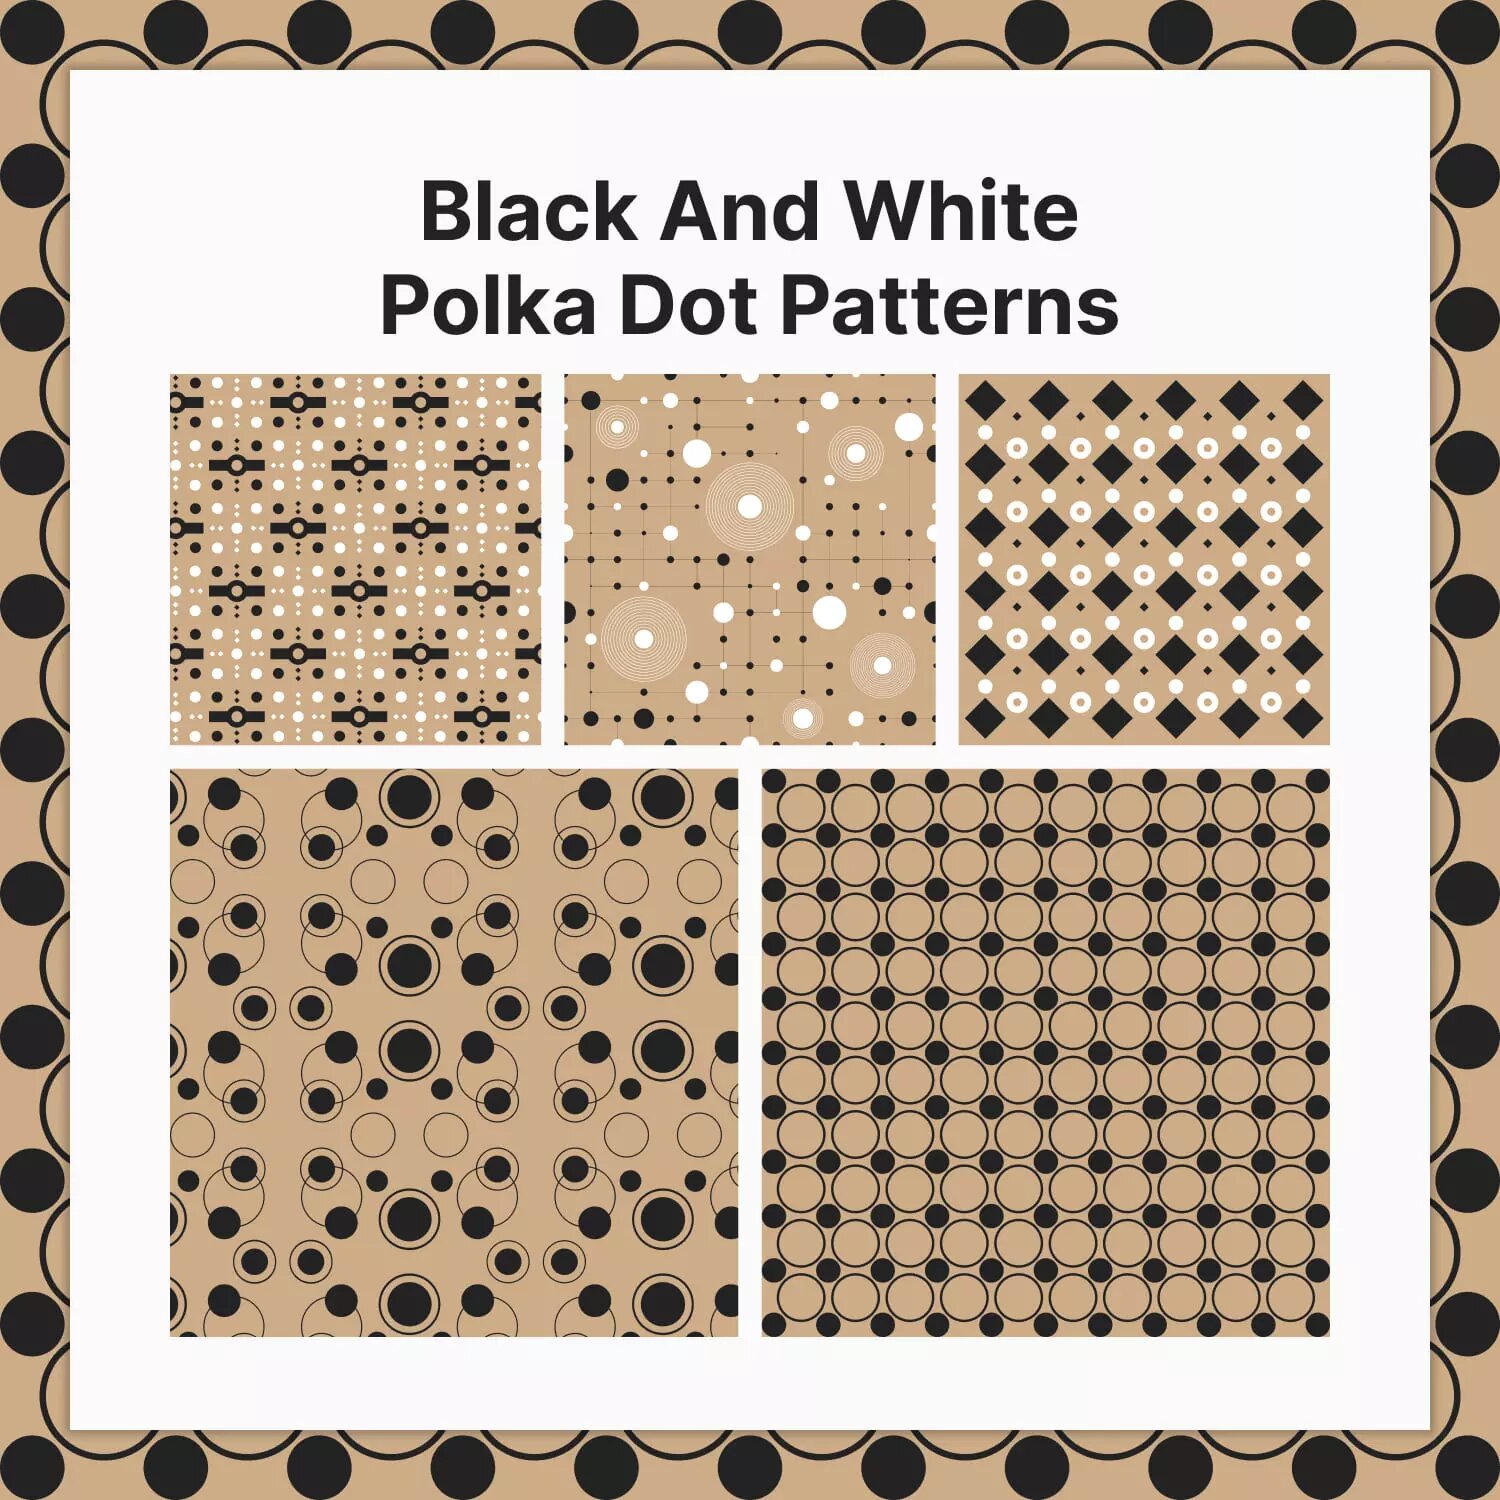 Black And White Polka Dot Patterns Preview 6.